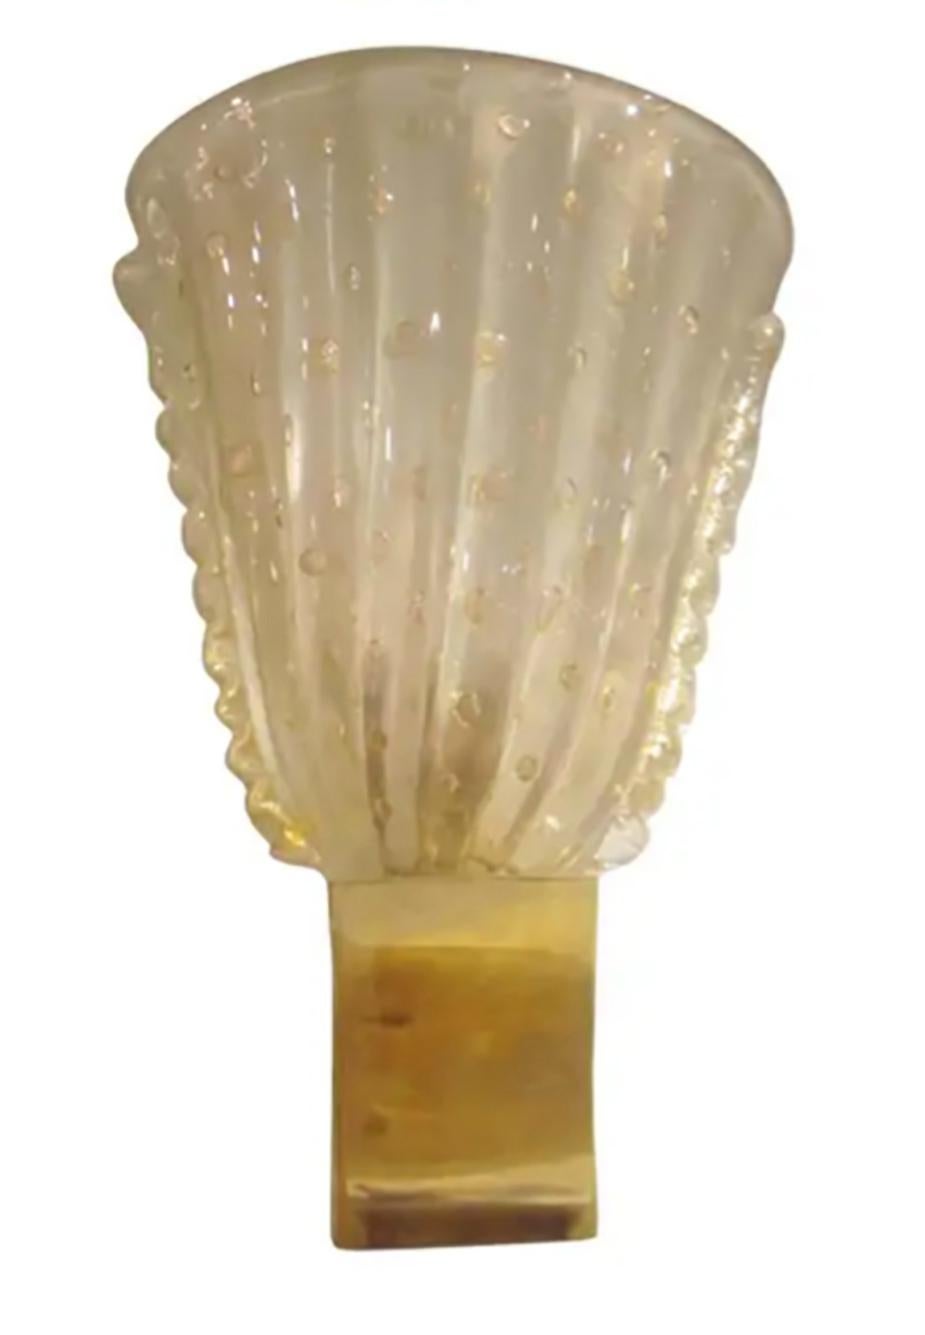 Pair of custom Rugiodoso Murano glass sconces.
Lead Time for custom made is 8-10 weeks.
NOTE: This design has been retired. Please see our other listings for Murano Glass Sconces.